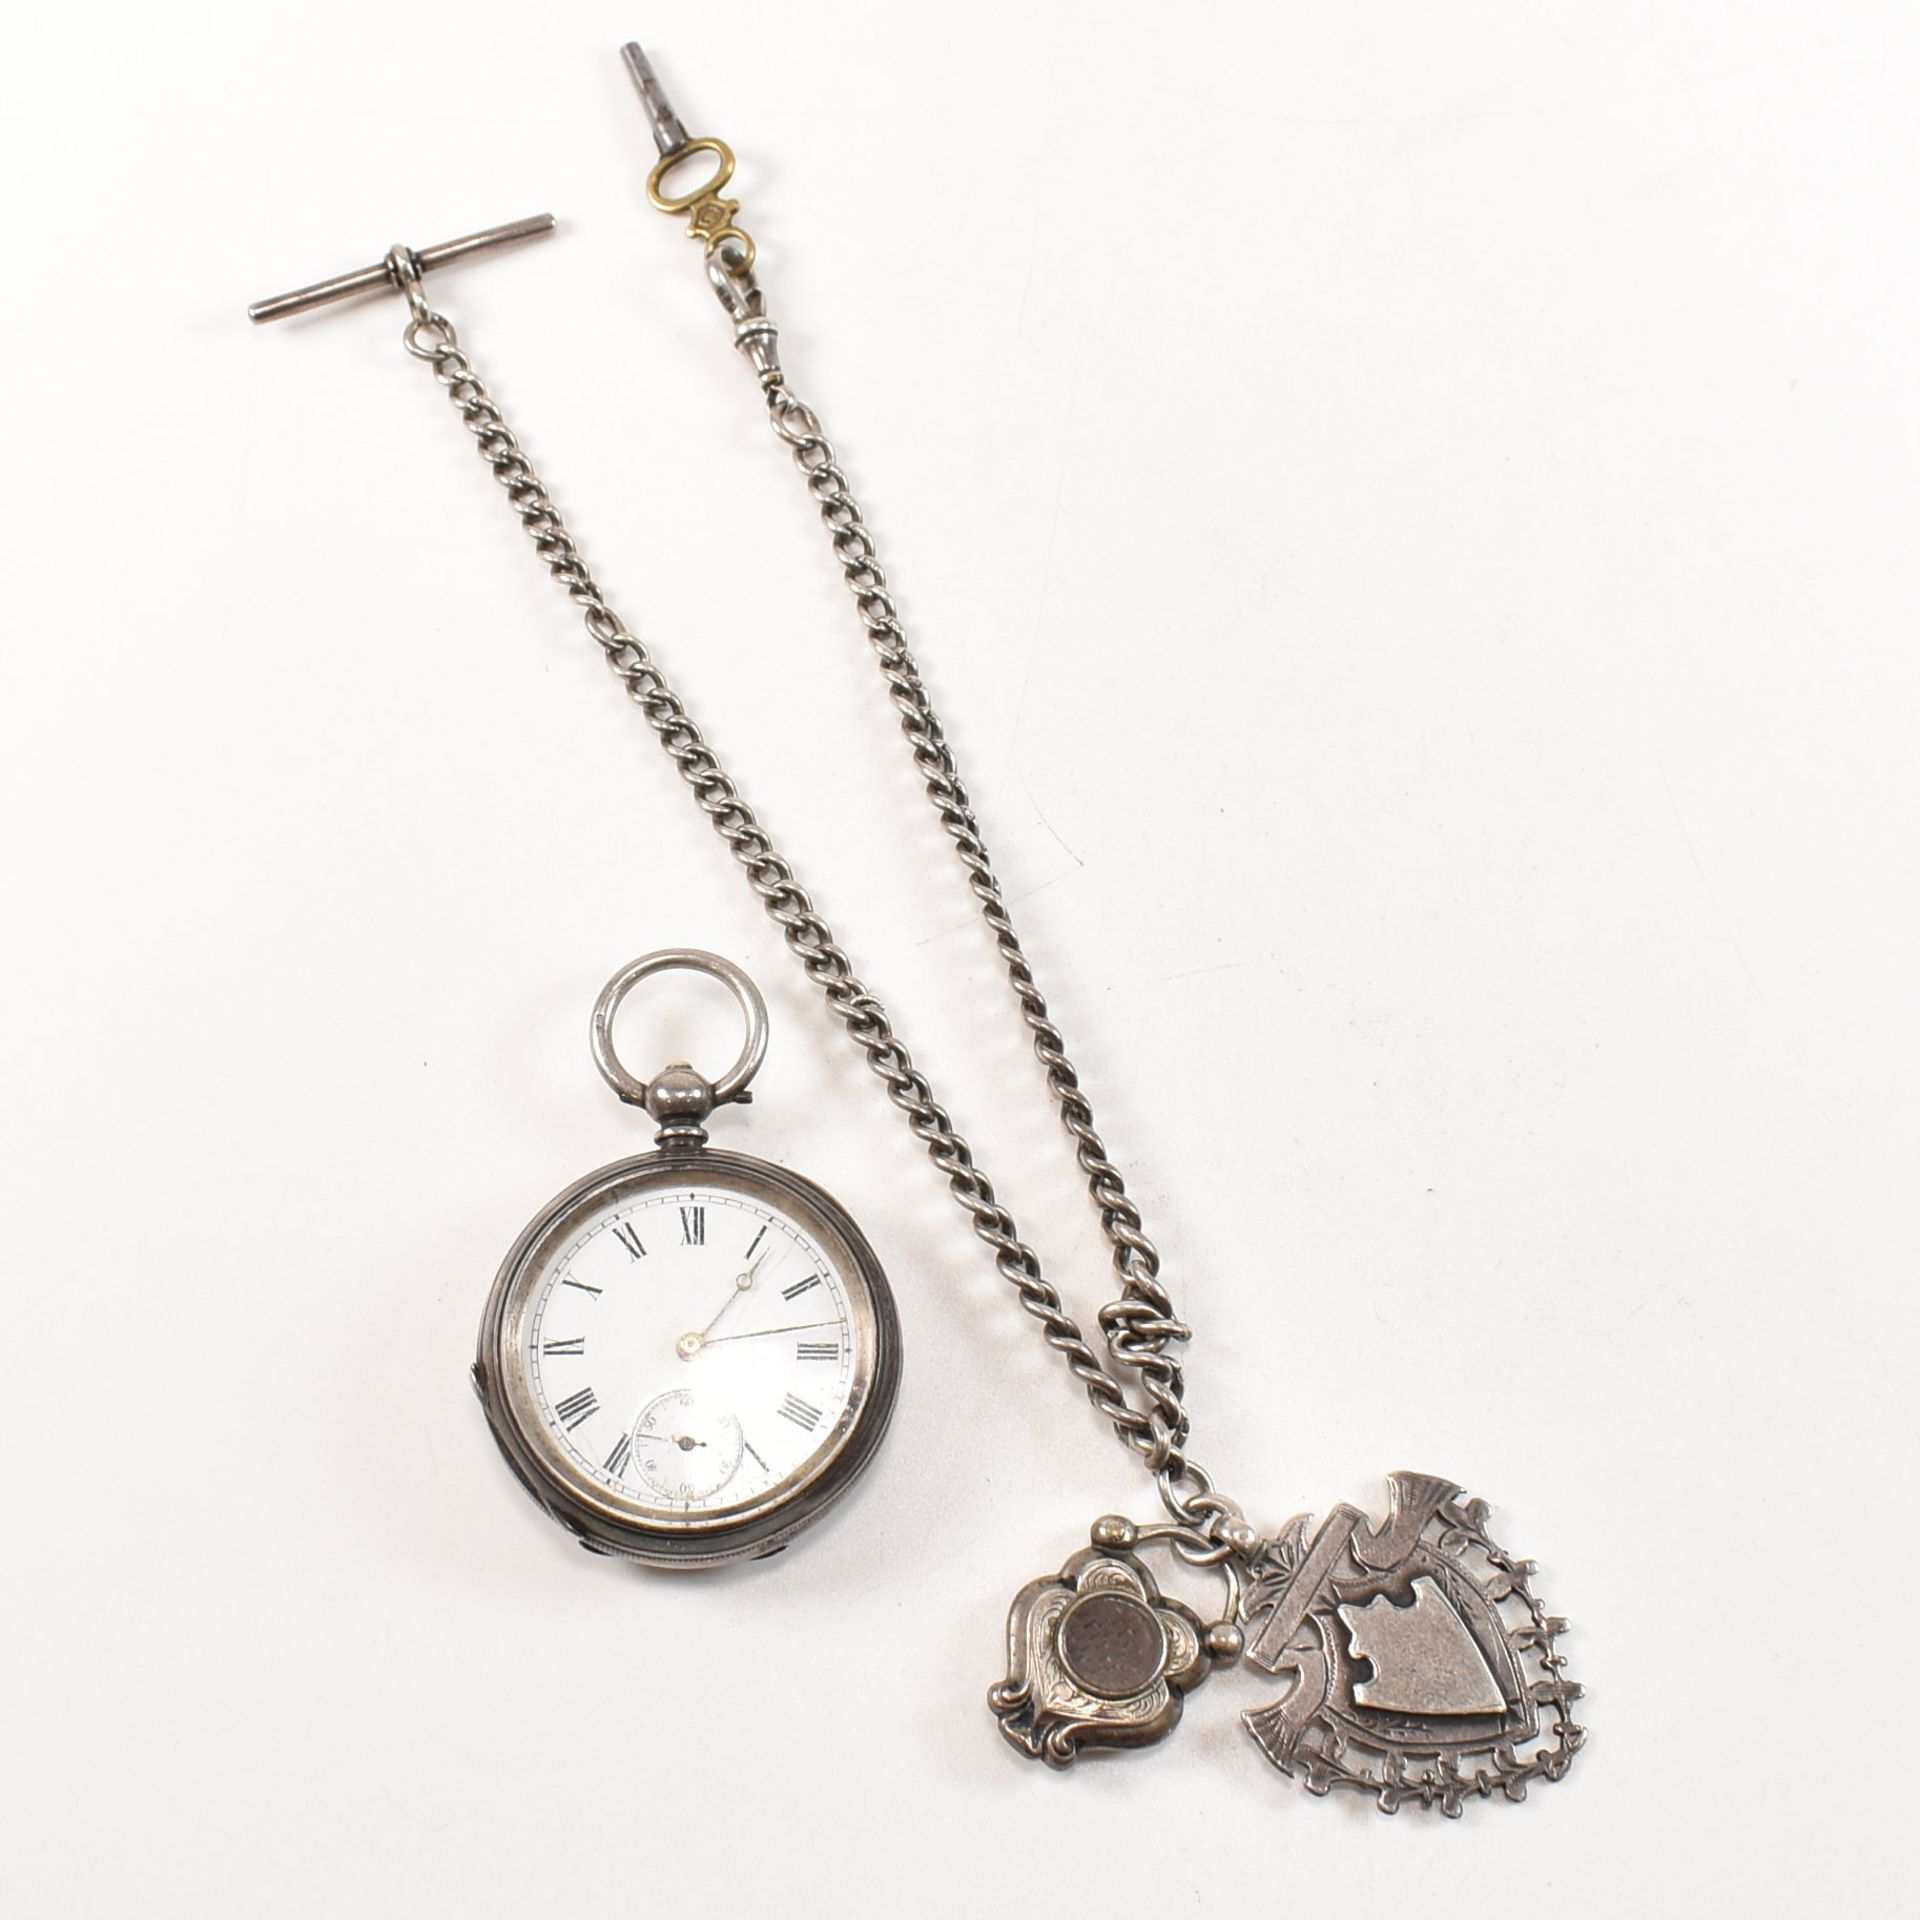 VICTORIAN SILVER POCKET WATCH ON CHAIN WITH KEY & FOBS